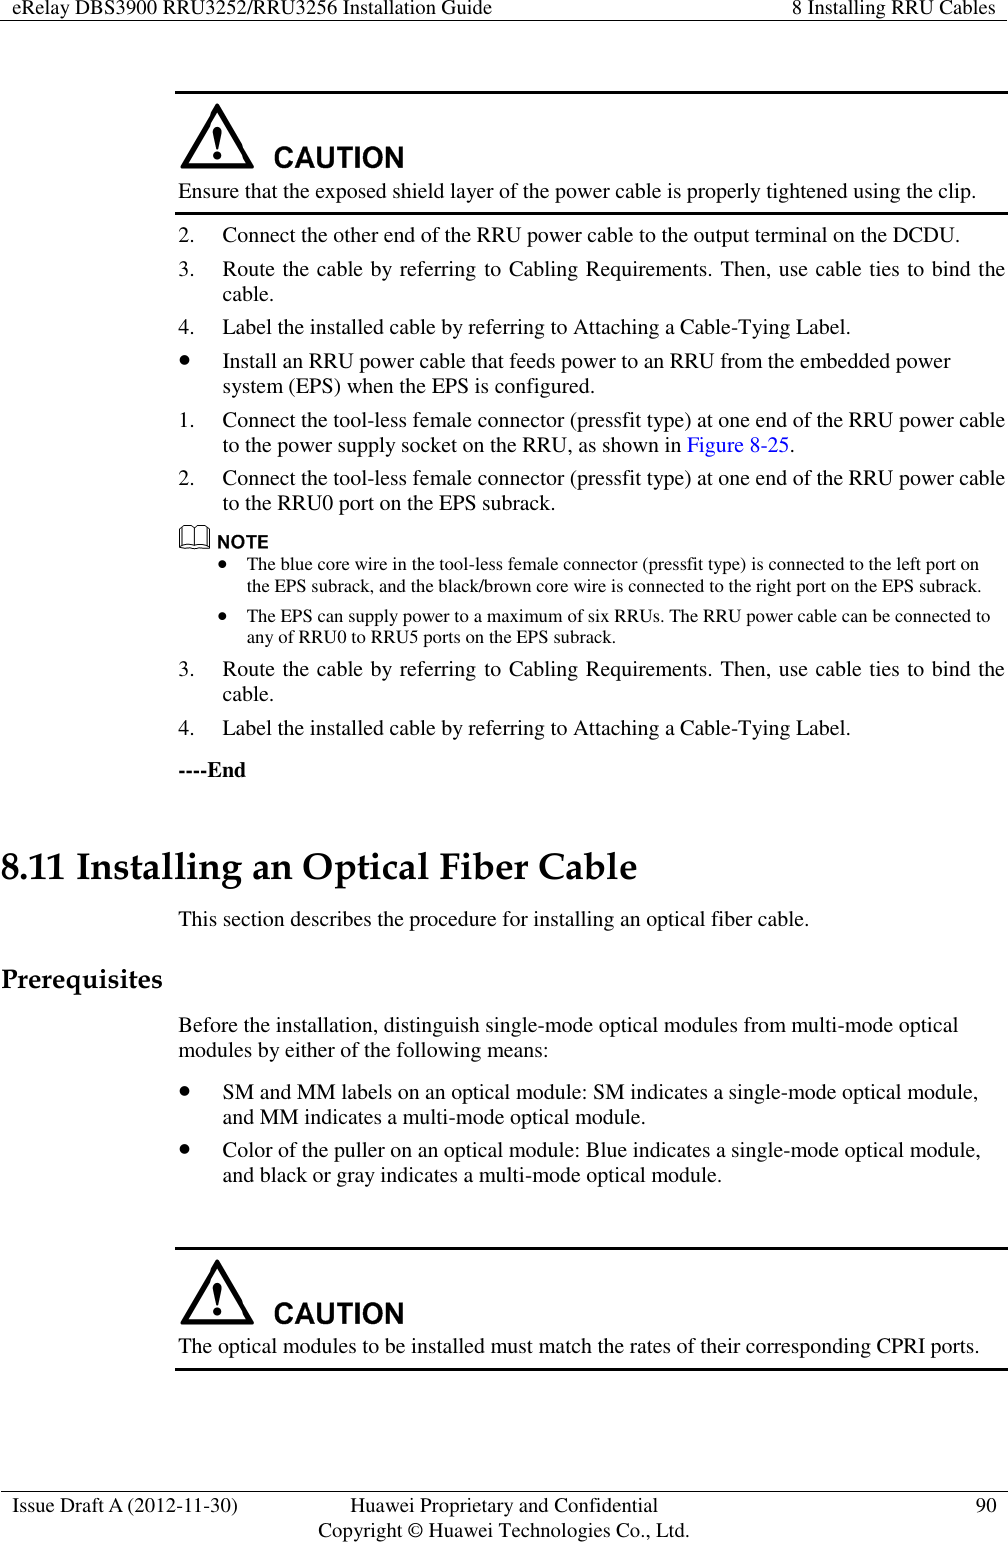 eRelay DBS3900 RRU3252/RRU3256 Installation Guide 8 Installing RRU Cables  Issue Draft A (2012-11-30) Huawei Proprietary and Confidential                                     Copyright © Huawei Technologies Co., Ltd. 90    Ensure that the exposed shield layer of the power cable is properly tightened using the clip. 2. Connect the other end of the RRU power cable to the output terminal on the DCDU. 3. Route the cable by referring to Cabling Requirements. Then, use cable ties to bind the cable. 4. Label the installed cable by referring to Attaching a Cable-Tying Label.  Install an RRU power cable that feeds power to an RRU from the embedded power system (EPS) when the EPS is configured. 1. Connect the tool-less female connector (pressfit type) at one end of the RRU power cable to the power supply socket on the RRU, as shown in Figure 8-25. 2. Connect the tool-less female connector (pressfit type) at one end of the RRU power cable to the RRU0 port on the EPS subrack.   The blue core wire in the tool-less female connector (pressfit type) is connected to the left port on the EPS subrack, and the black/brown core wire is connected to the right port on the EPS subrack.  The EPS can supply power to a maximum of six RRUs. The RRU power cable can be connected to any of RRU0 to RRU5 ports on the EPS subrack. 3. Route the cable by referring to Cabling Requirements. Then, use cable ties to bind the cable. 4. Label the installed cable by referring to Attaching a Cable-Tying Label. ----End 8.11 Installing an Optical Fiber Cable   This section describes the procedure for installing an optical fiber cable. Prerequisites Before the installation, distinguish single-mode optical modules from multi-mode optical modules by either of the following means:  SM and MM labels on an optical module: SM indicates a single-mode optical module, and MM indicates a multi-mode optical module.  Color of the puller on an optical module: Blue indicates a single-mode optical module, and black or gray indicates a multi-mode optical module.   The optical modules to be installed must match the rates of their corresponding CPRI ports. 